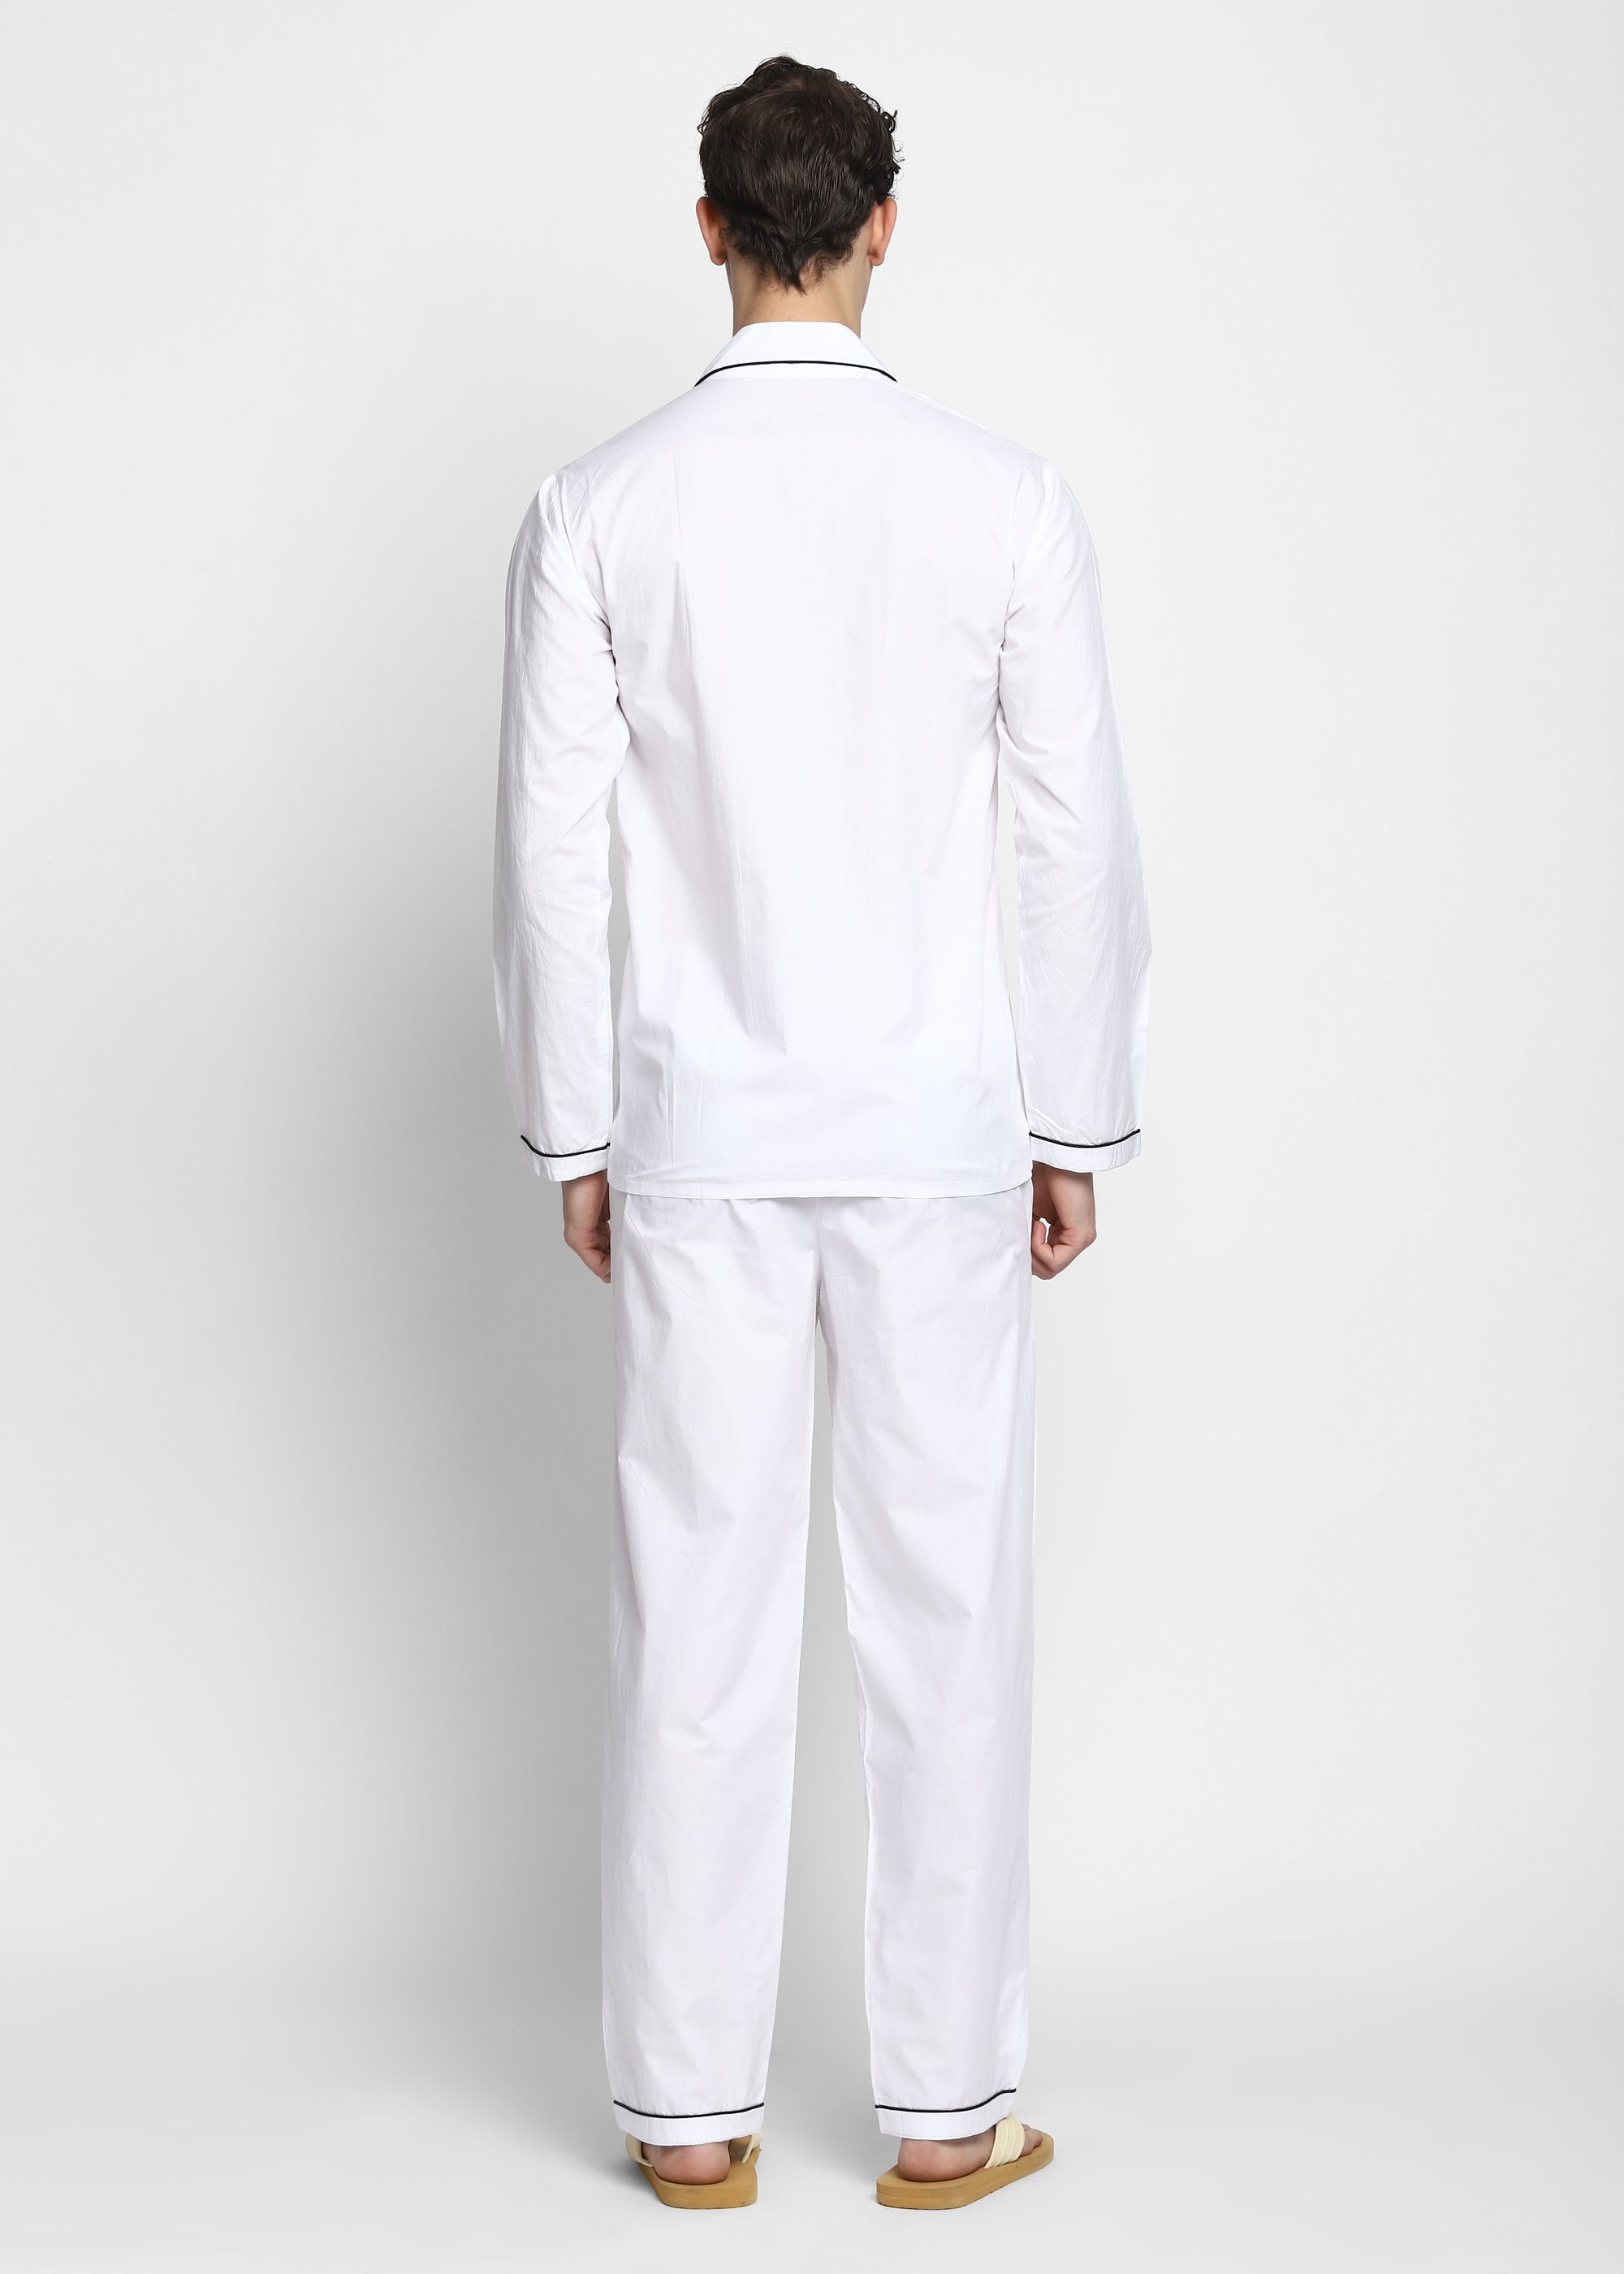 White Cotton Poplin with Black Piping Men's Night Suit - Shopbloom